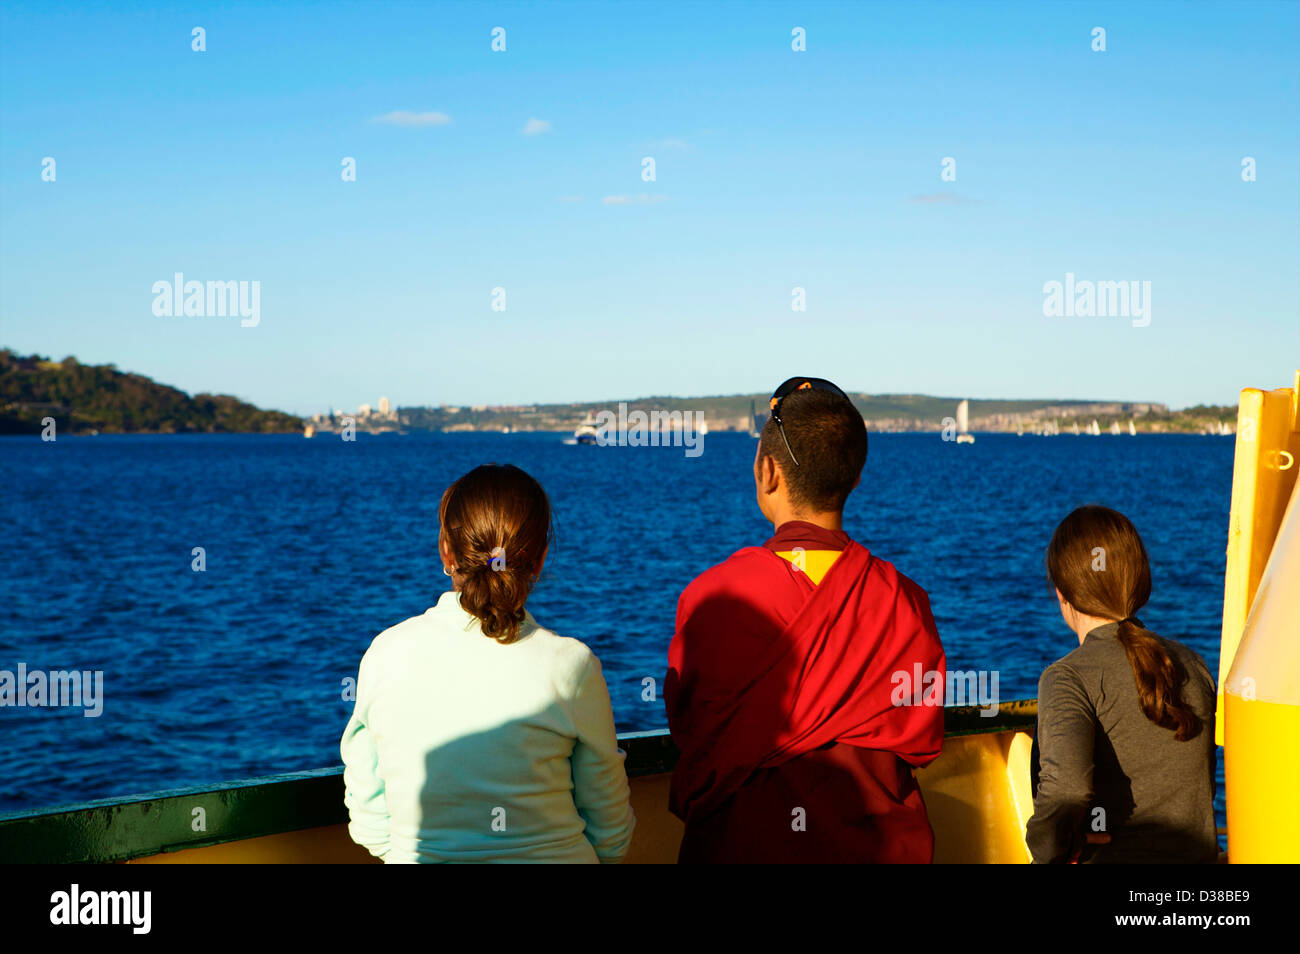 Two girls and a buddist monk look out from the deck of Sydney Ferry at the Sydney Harbor Stock Photo